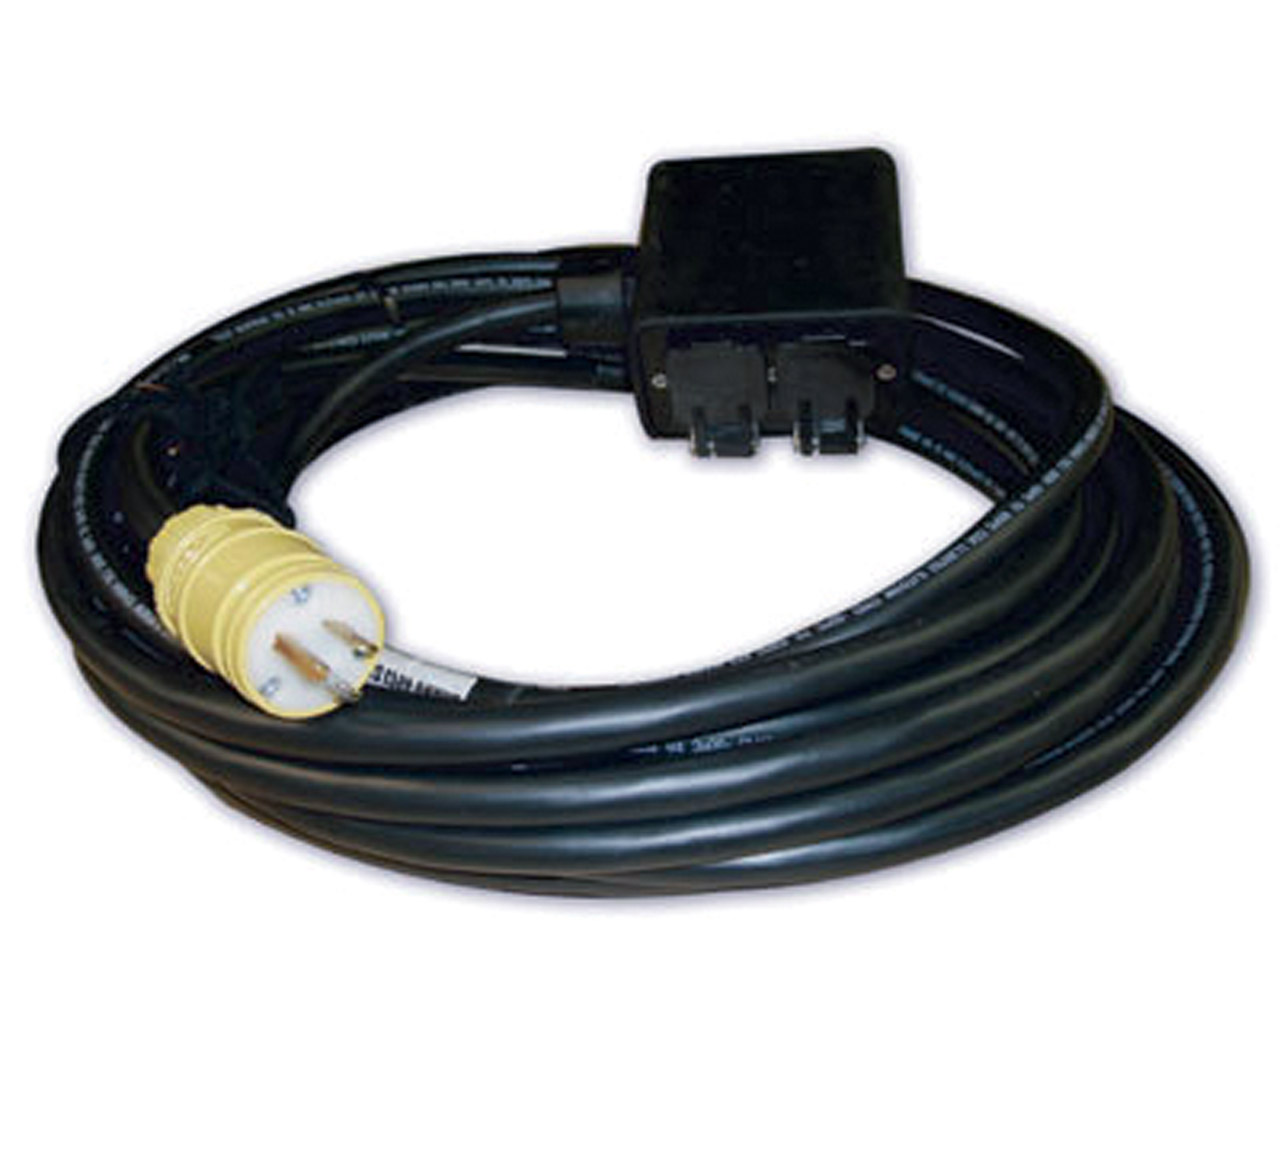 IEC 60309 Pin & Sleeve and Miscellaneous Cable Assemblies